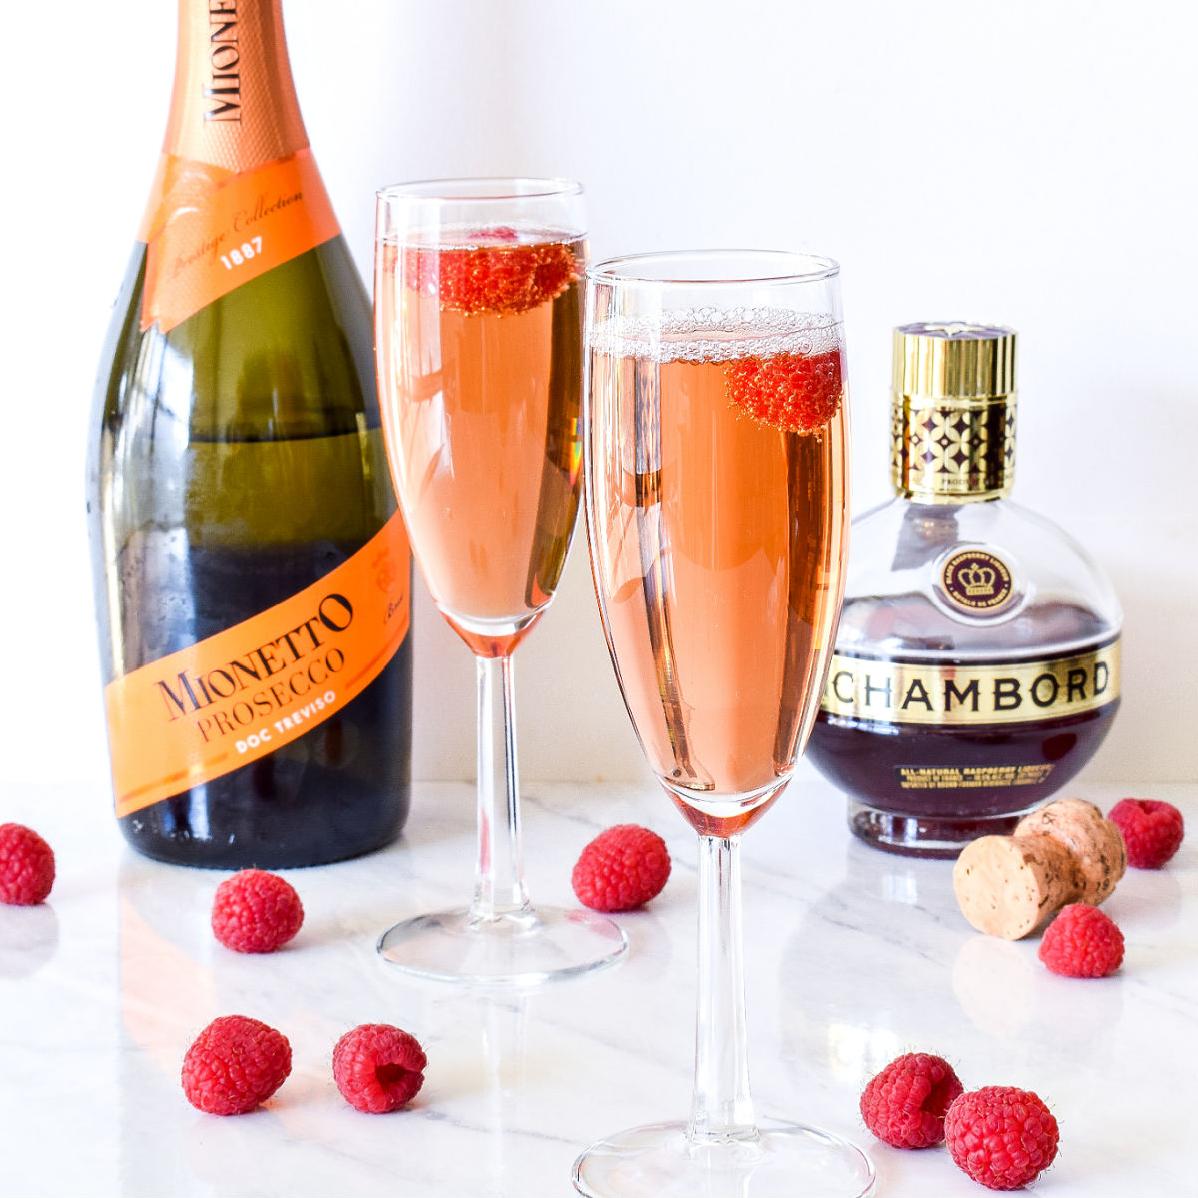  A bubbly concoction of raspberries and Chambord is a perfect way to start your evening.